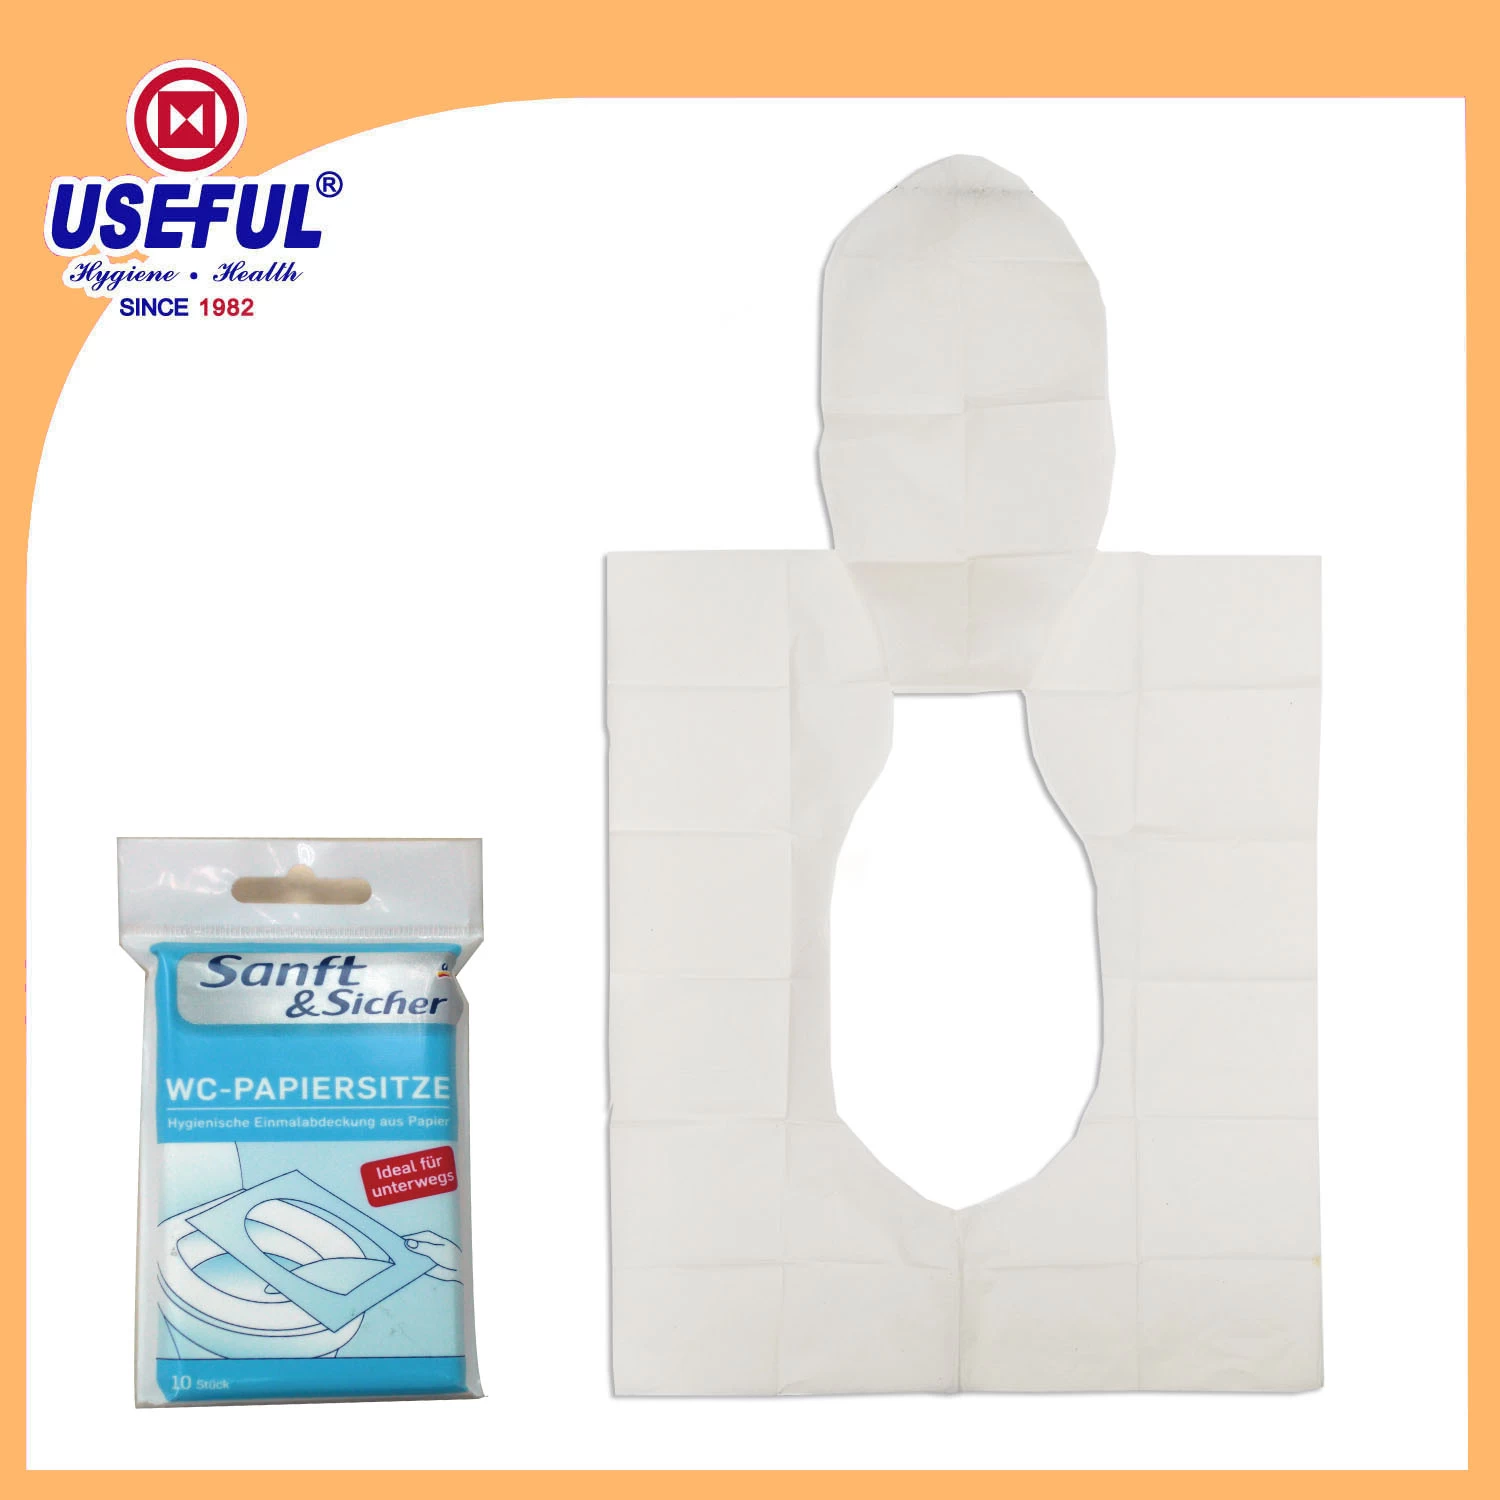 Flushable Toilet Seat Cover for promotion -small size